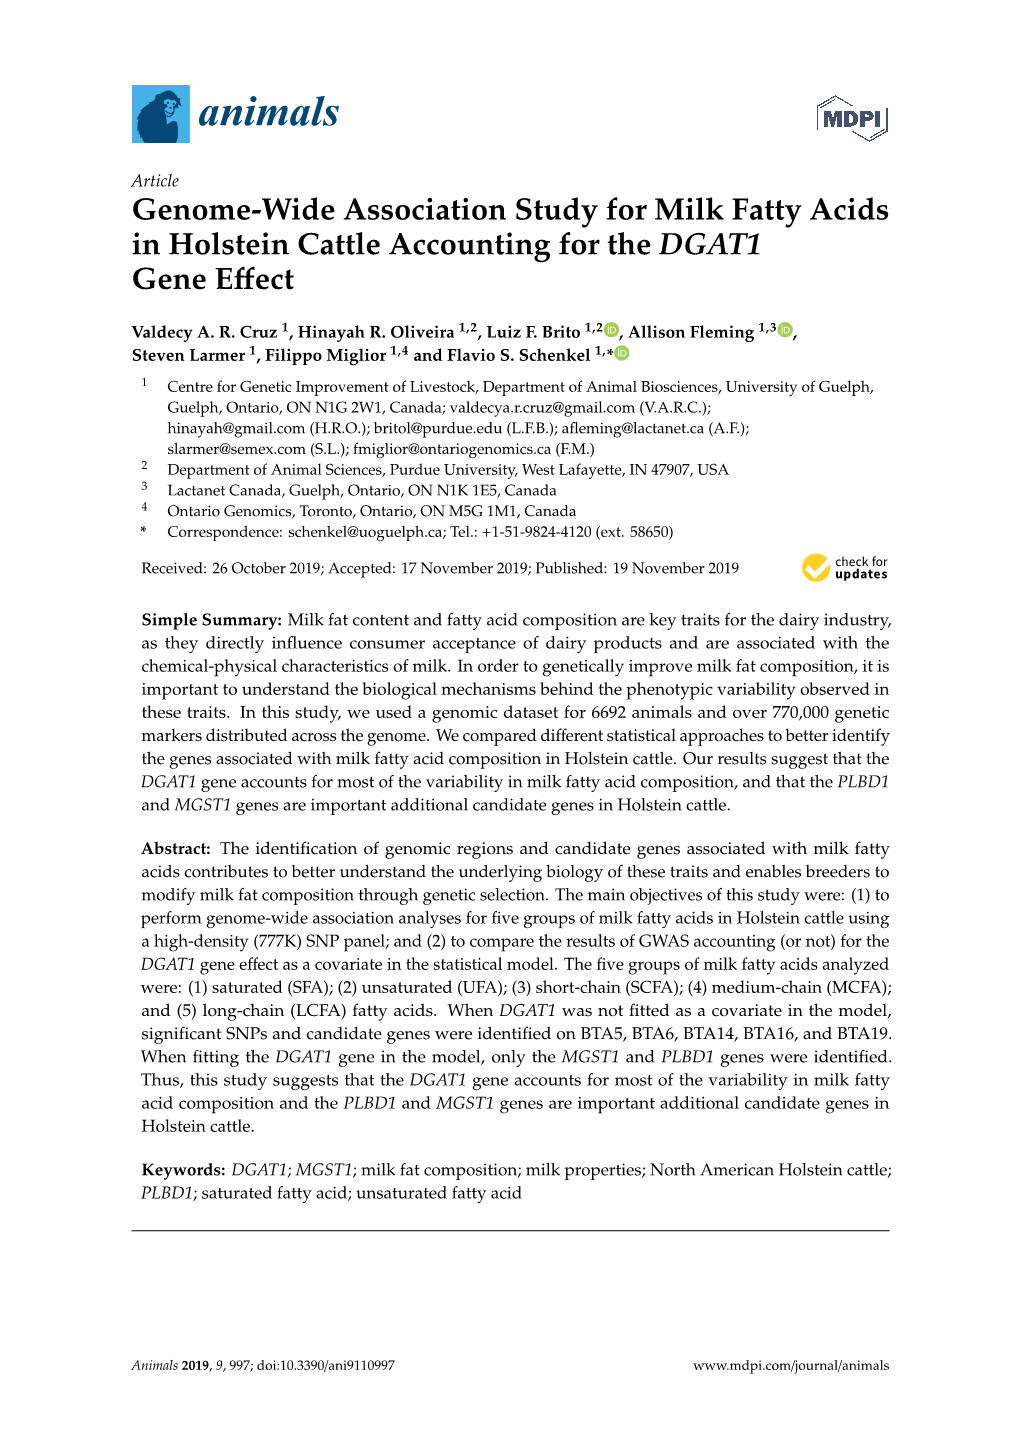 Genome-Wide Association Study for Milk Fatty Acids in Holstein Cattle Accounting for the DGAT1 Gene Eﬀect